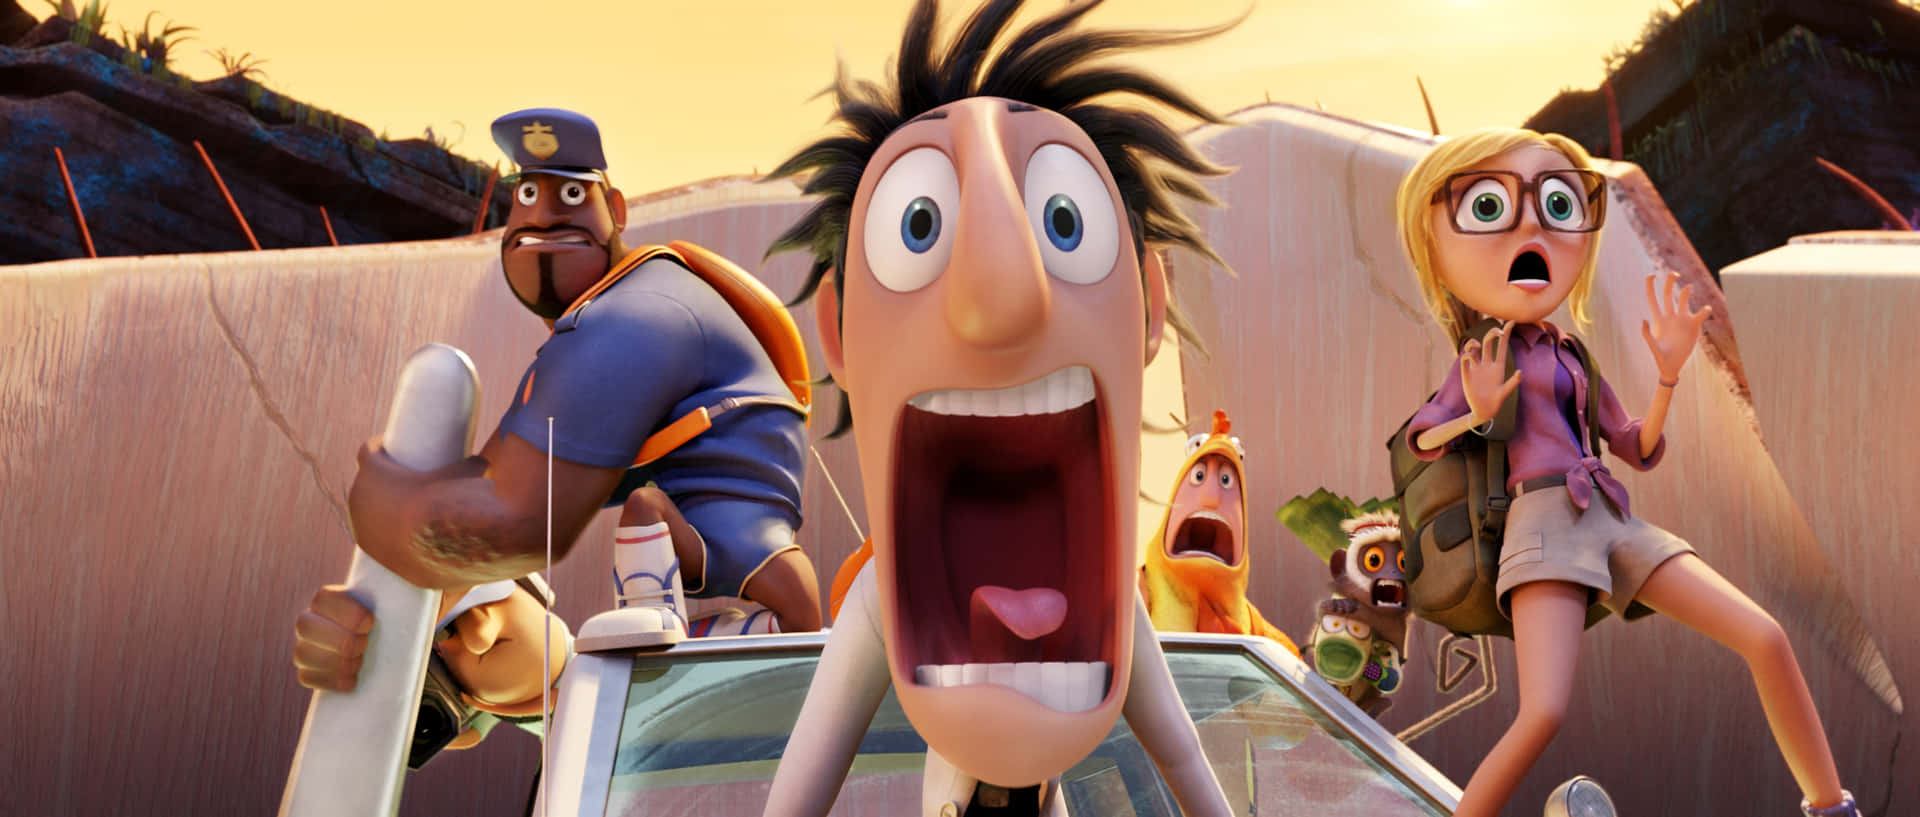 Cloudy With A Chance Of Meatballs 2 Characters Mouth Open Wallpaper